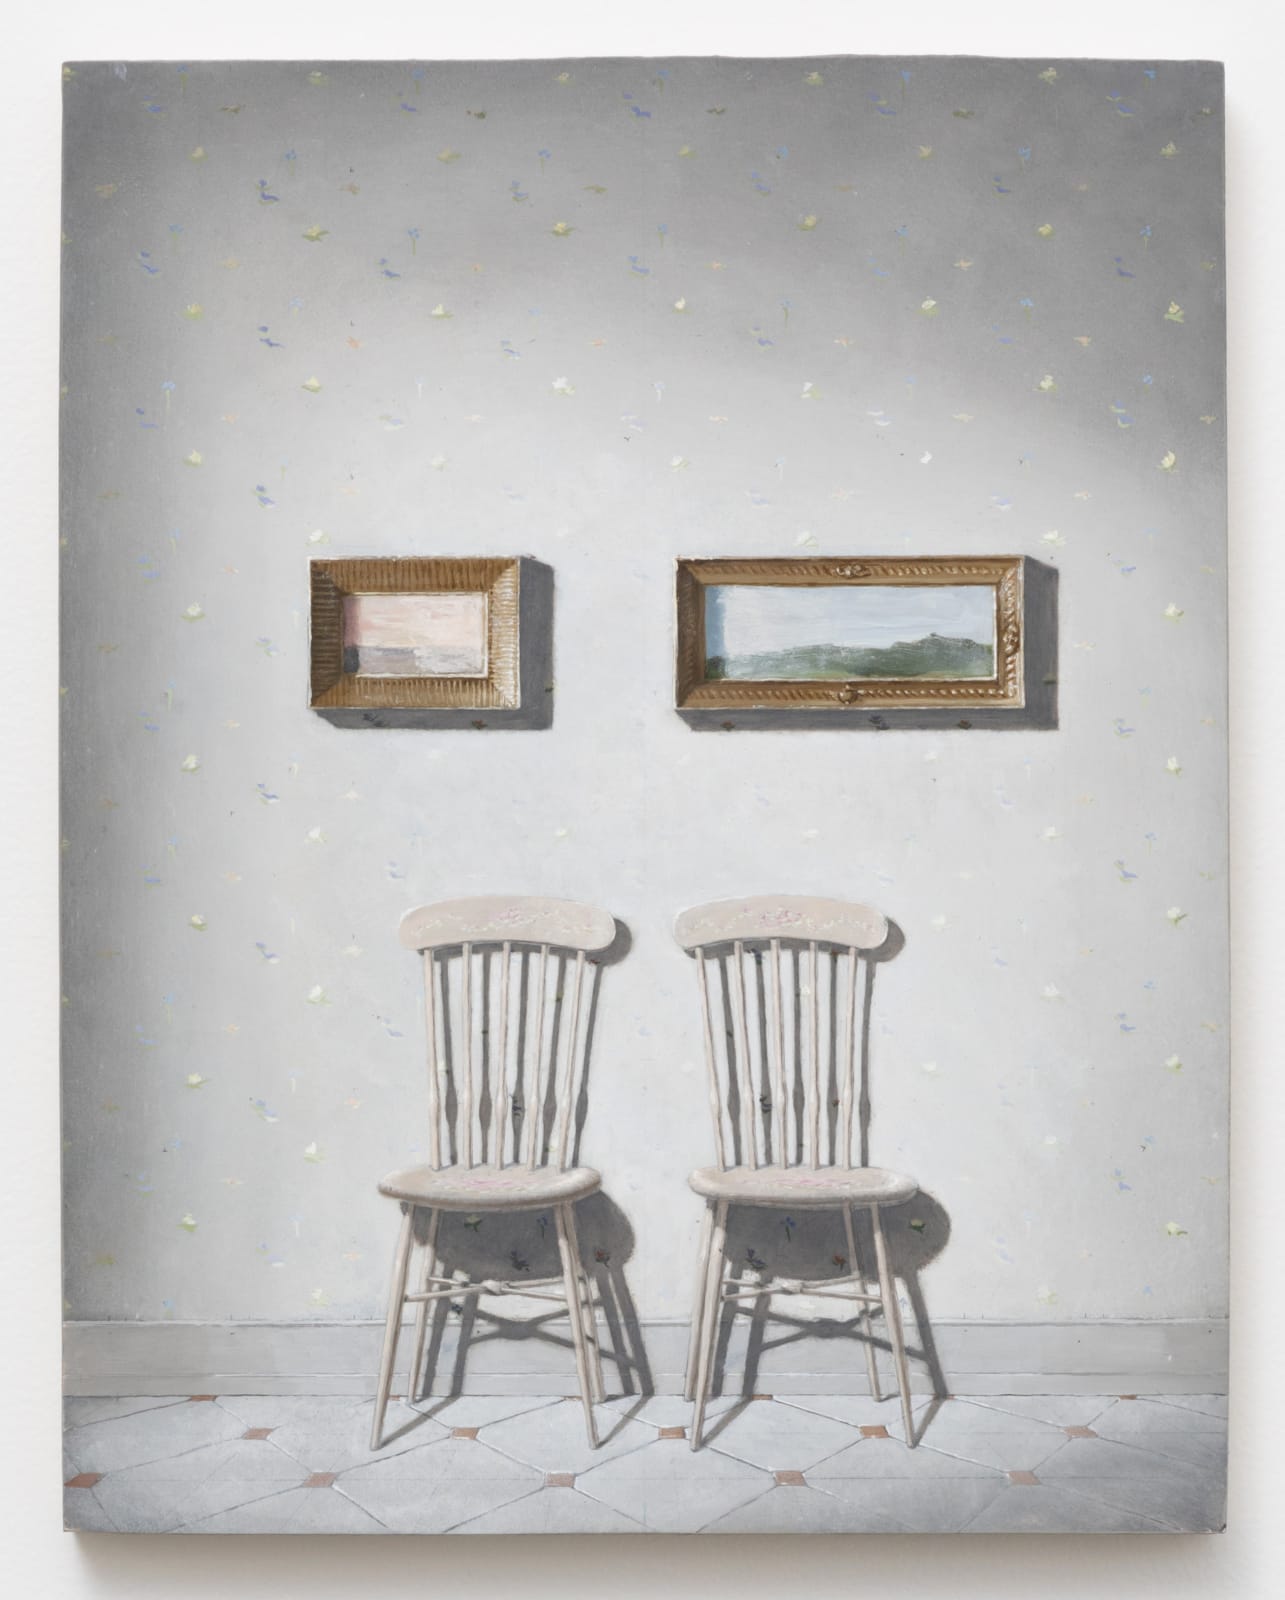 Quentin James McCaffrey, Landscapes and Chairs, 2021